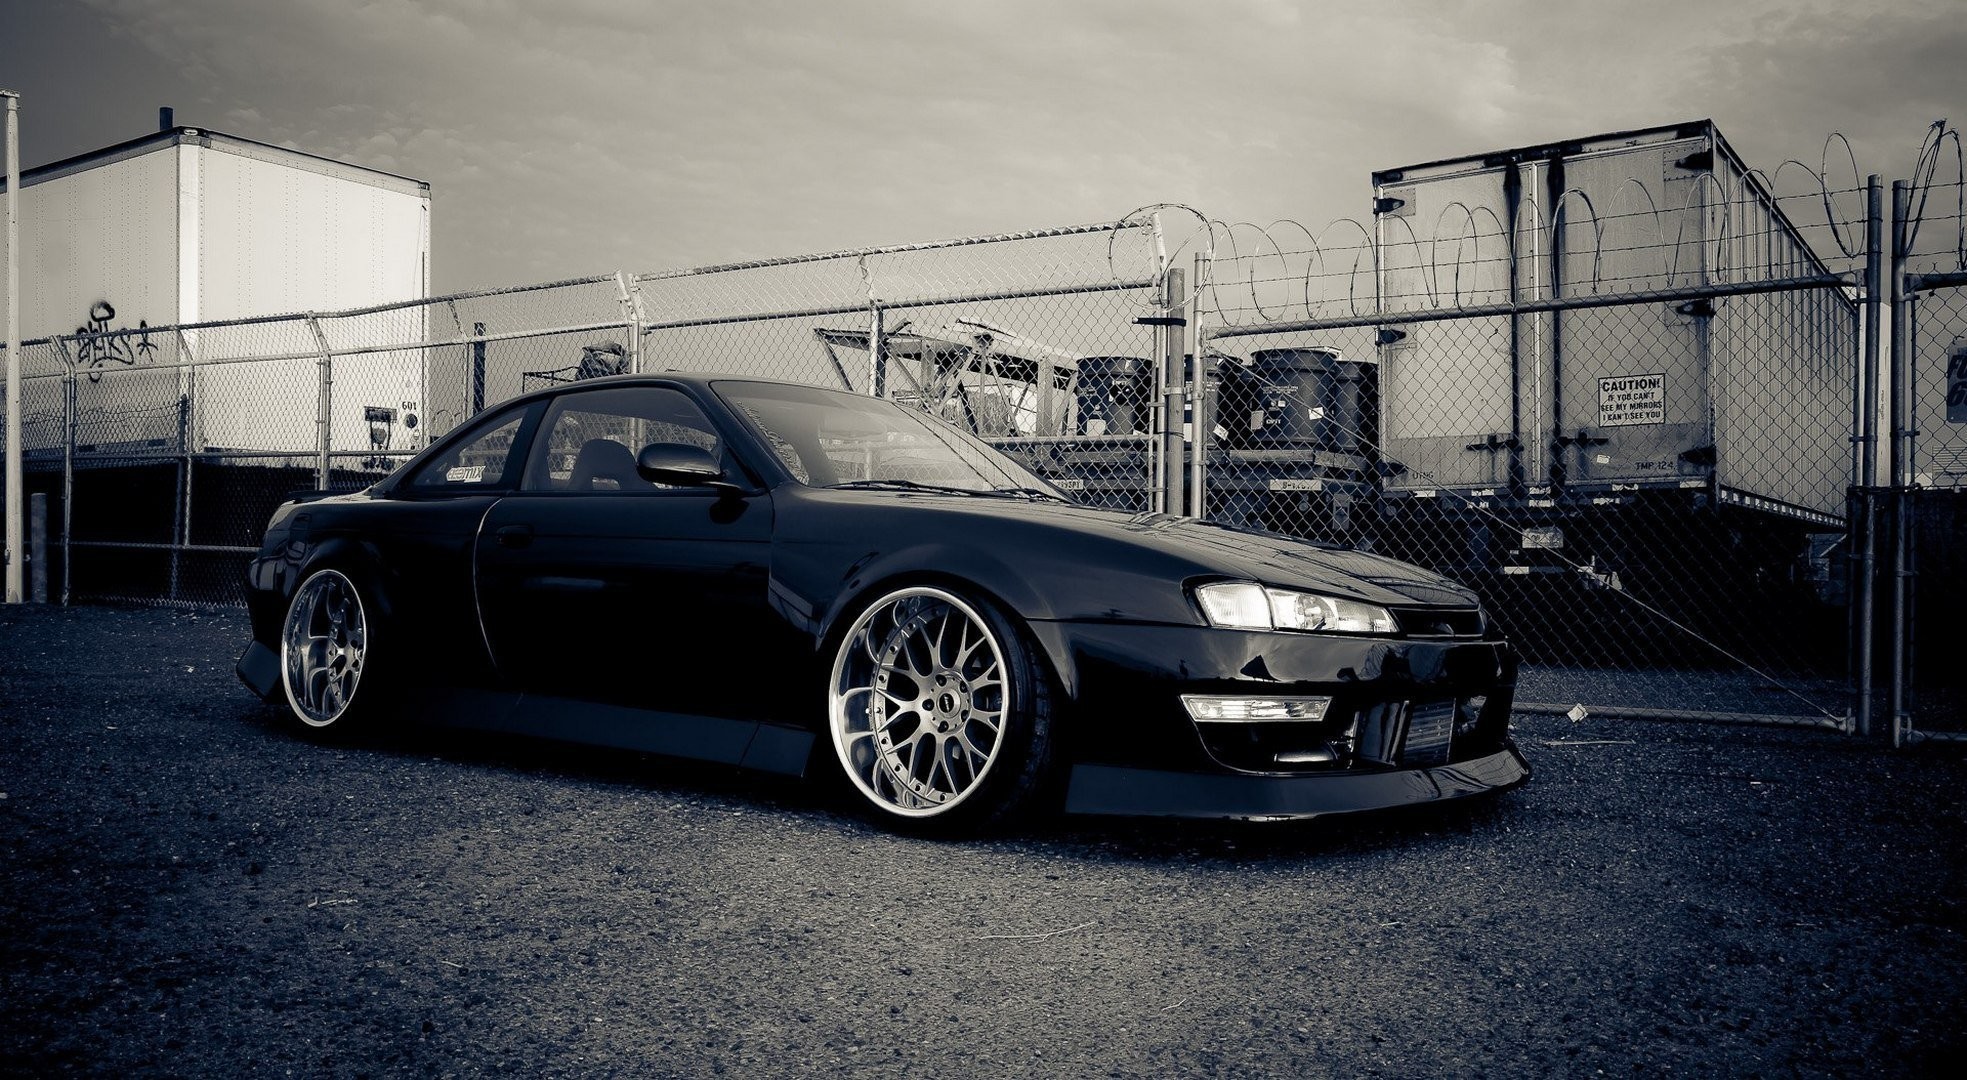 1967x1080 car nissan silvia 200sx black tuning jdm style stance nation drift cars car  wallpapers effect vehicles